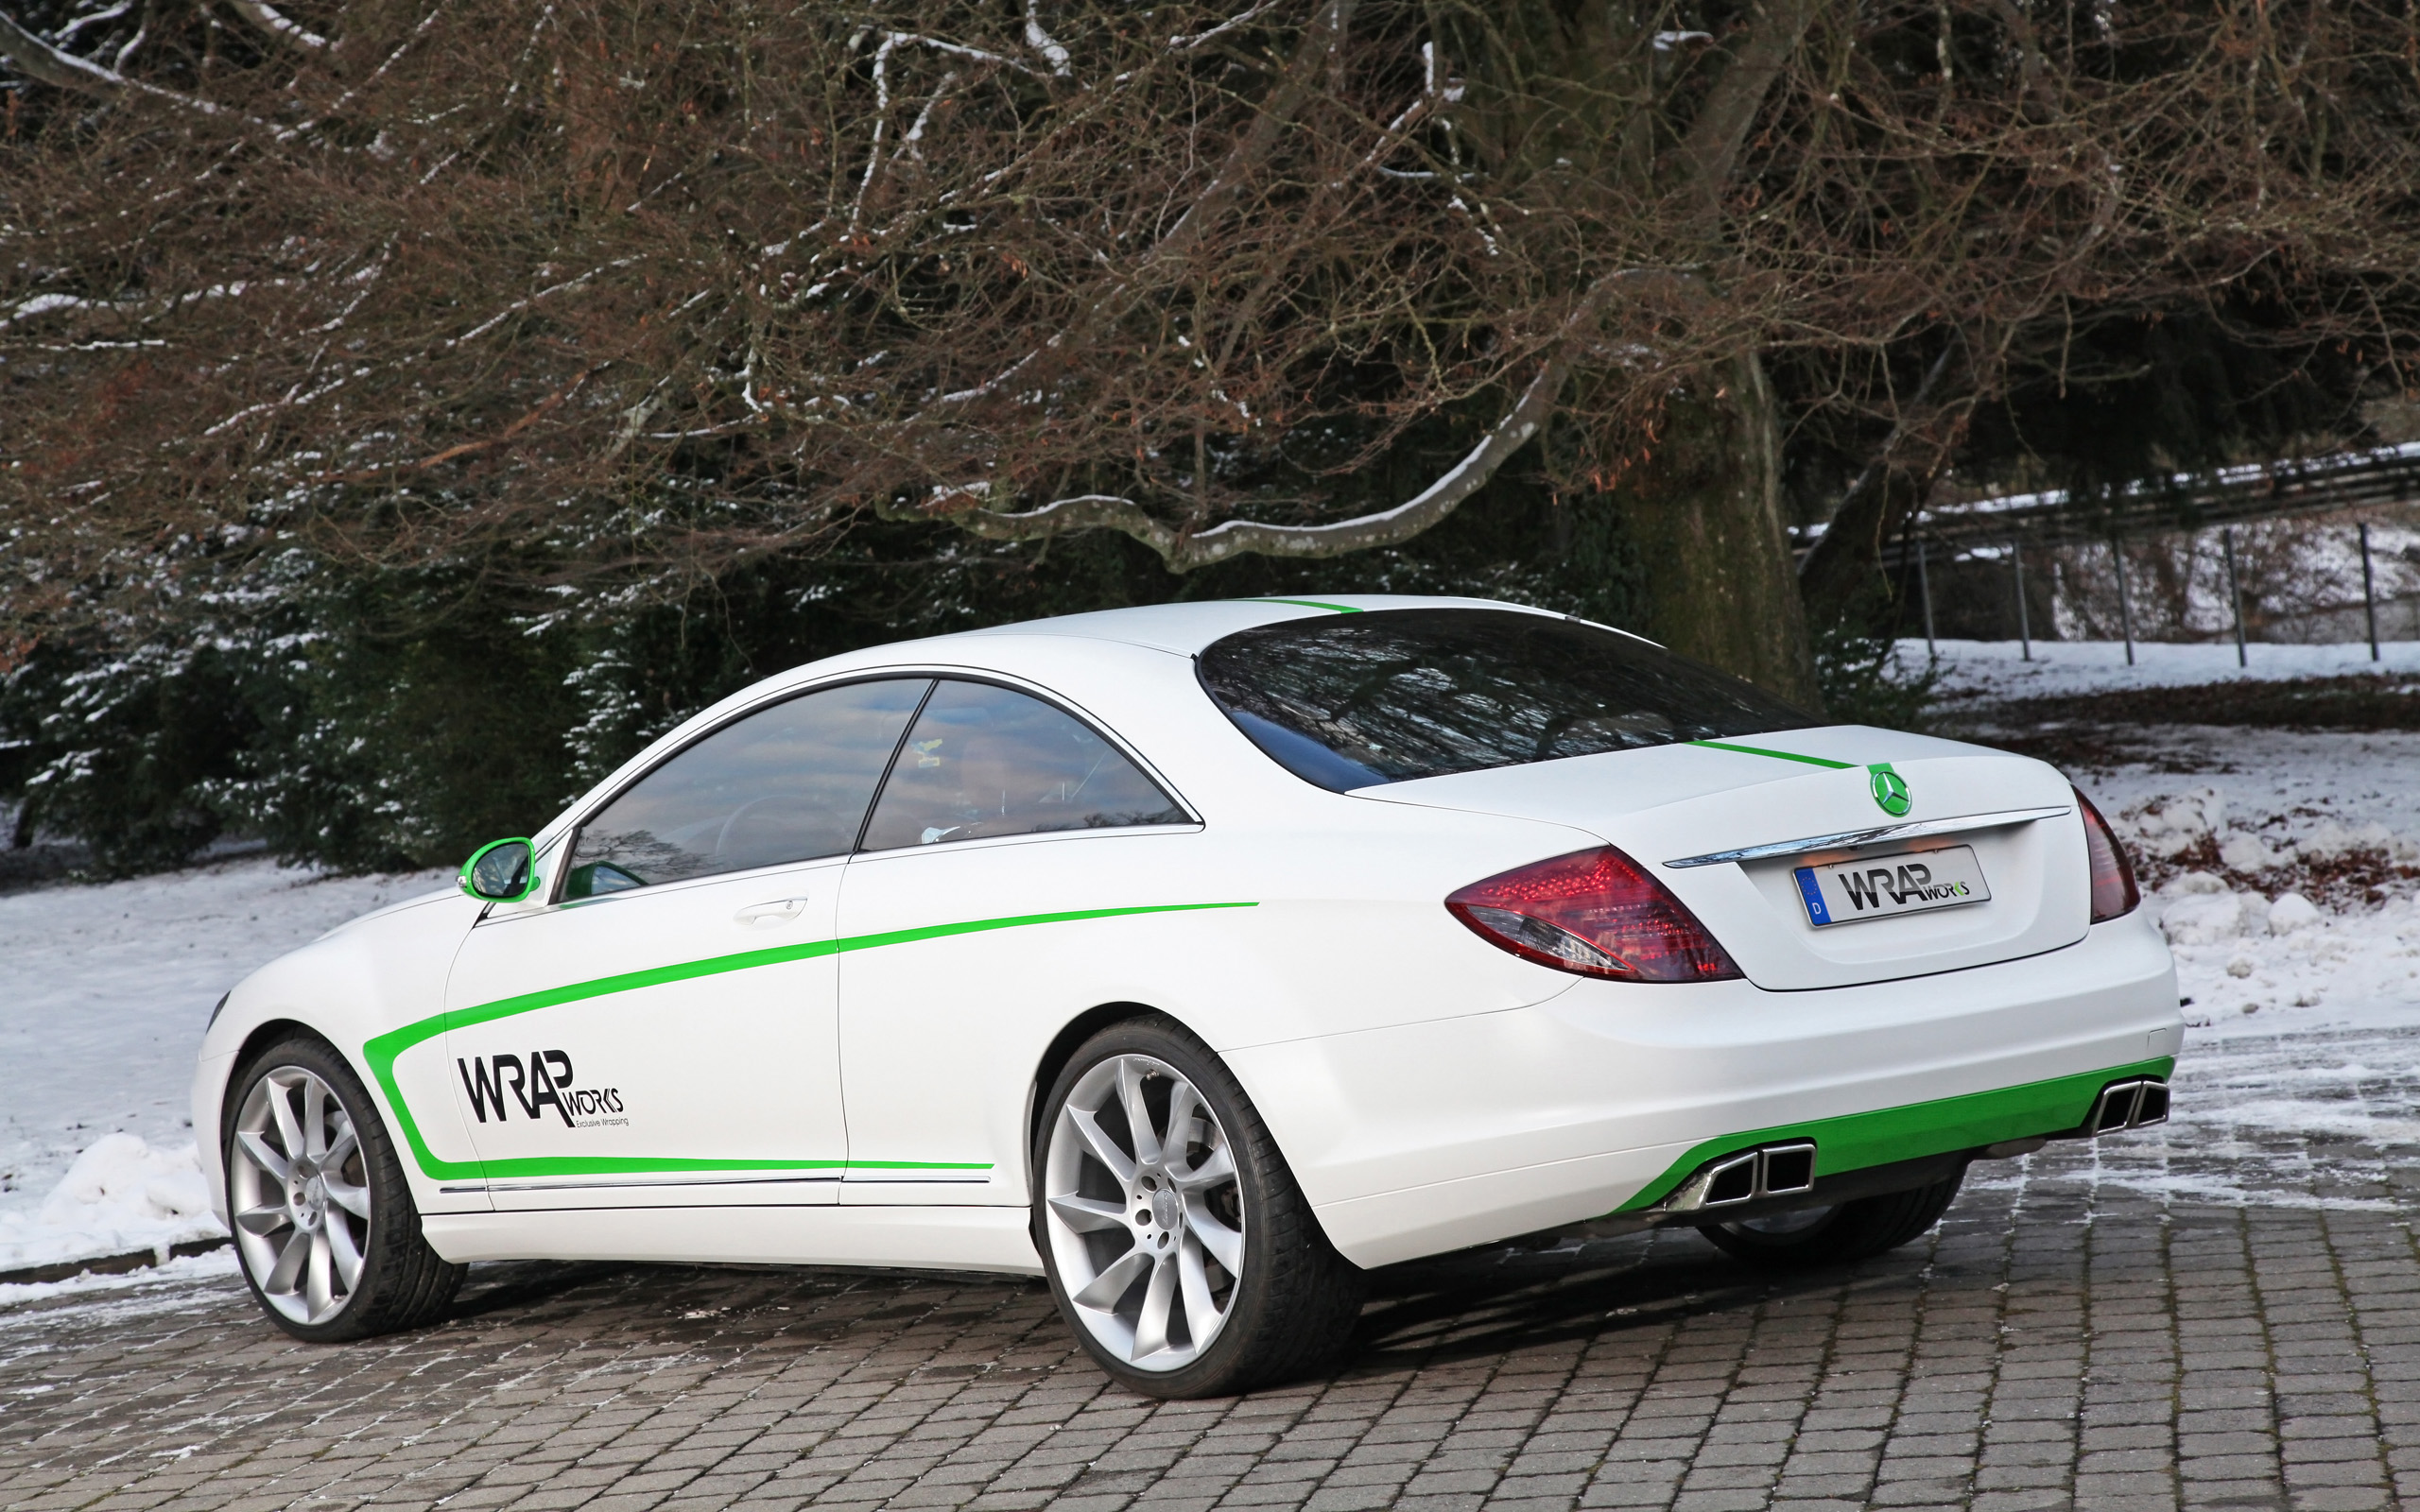 2007, Wrapworks, Mercedes, Benz, Cl 500, Tuning, Gh Wallpaper